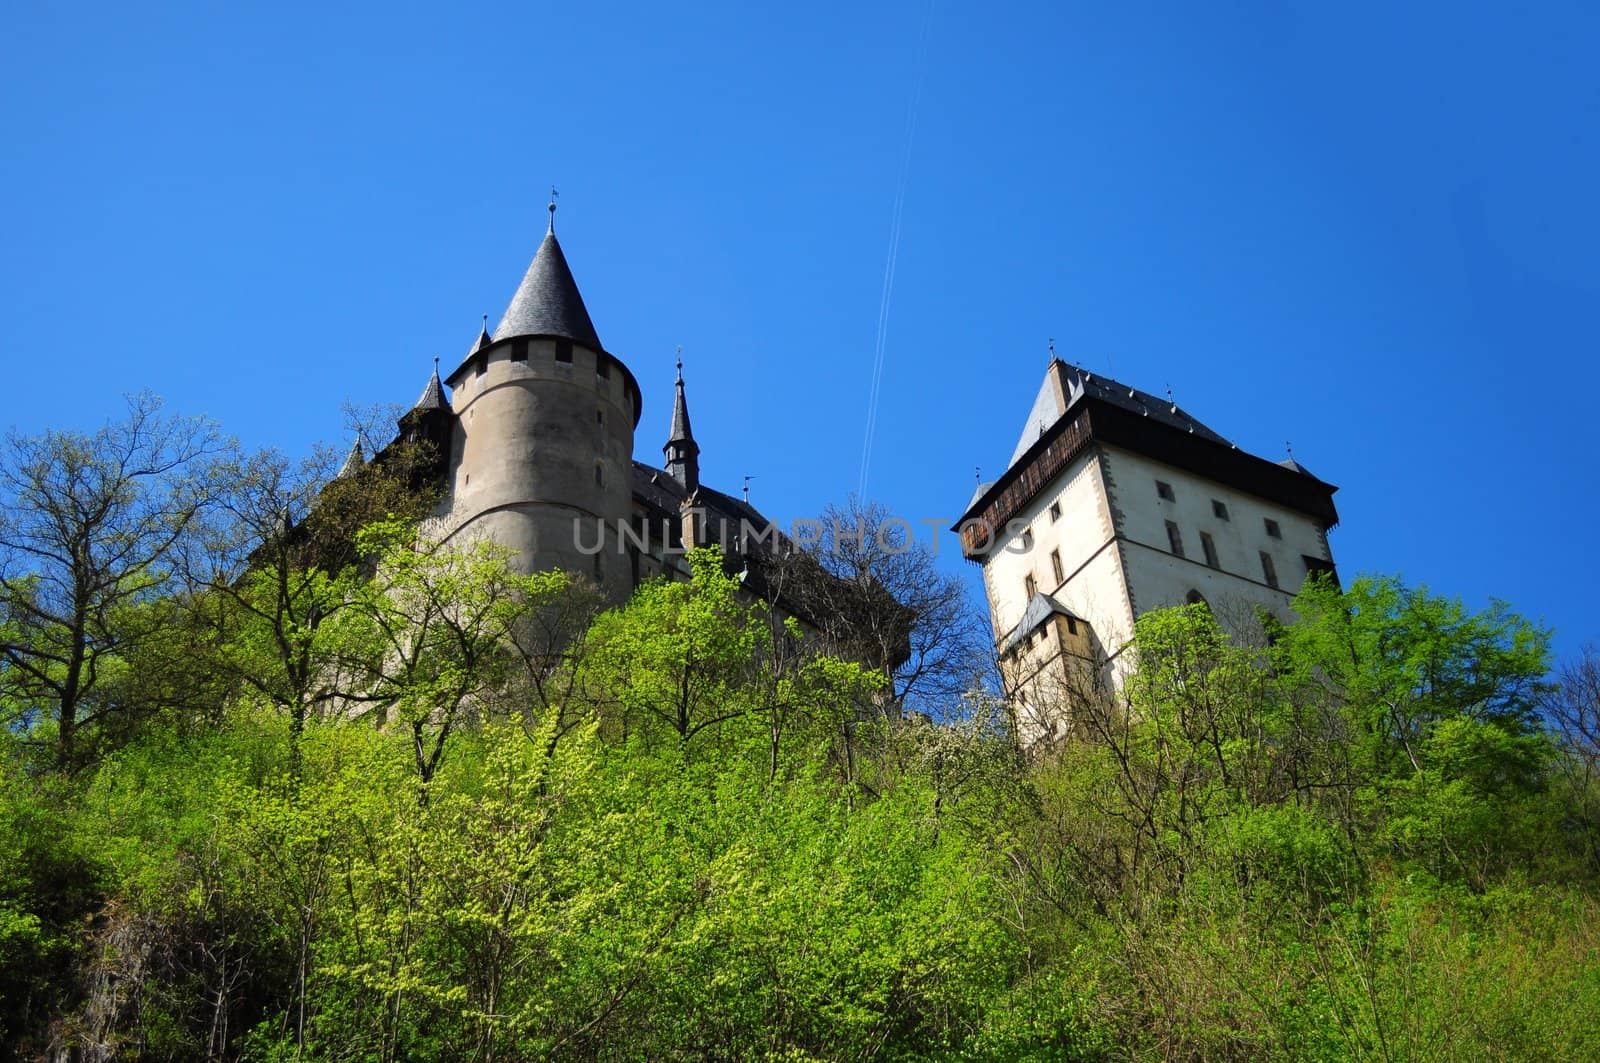 Panorama of the Karlstejn Castle over blue sky during the summer day